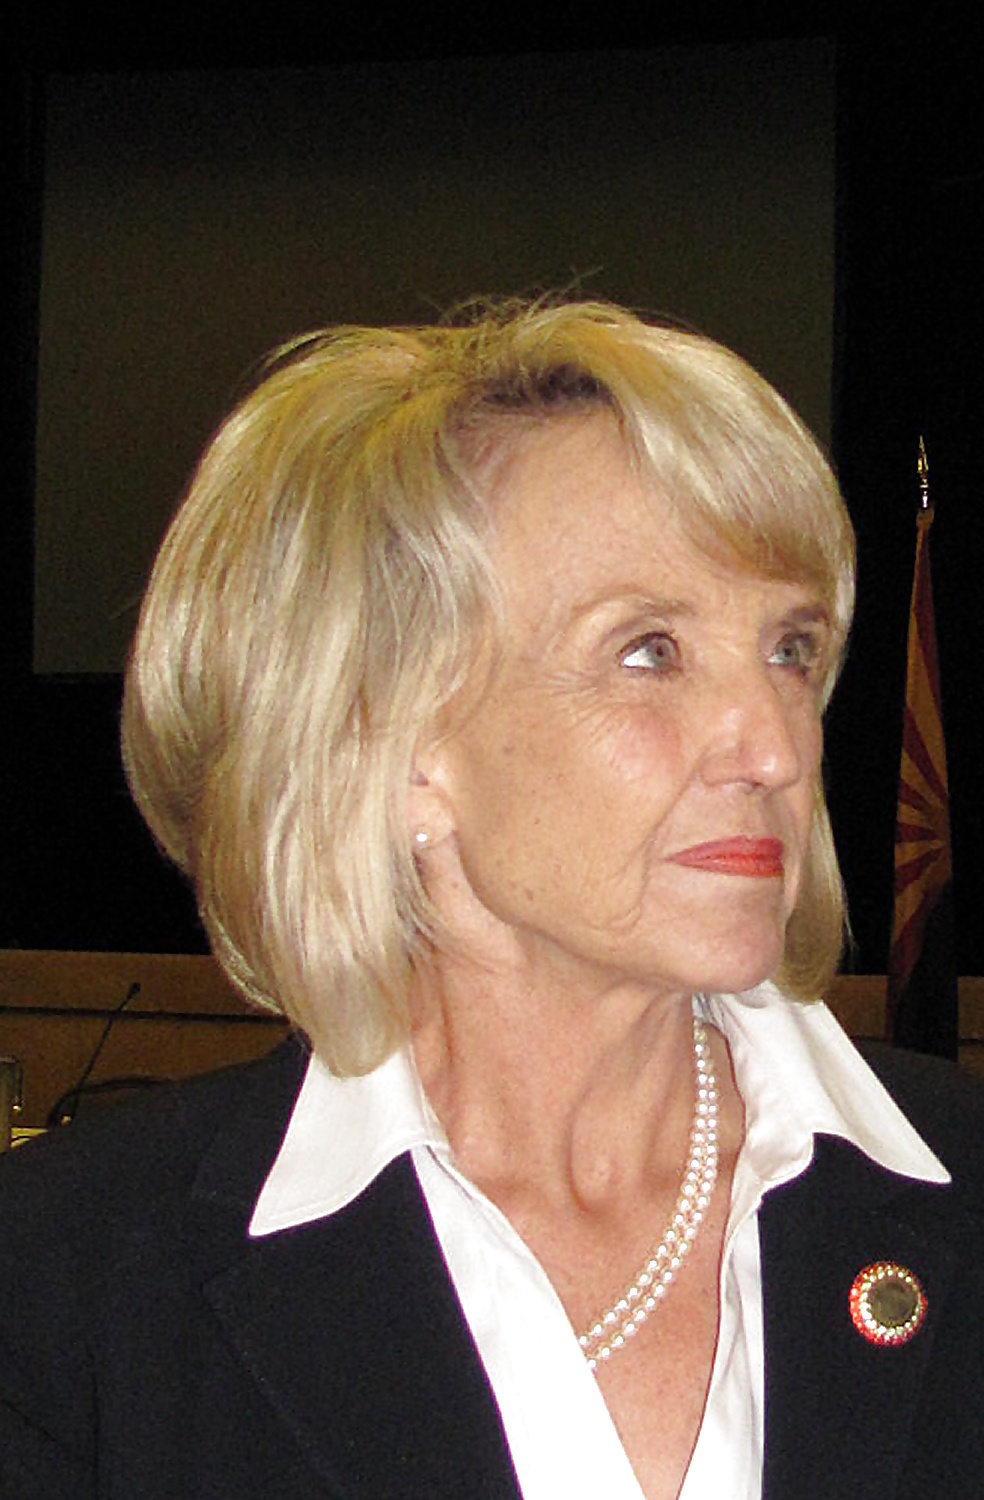 For all who love jerking off to conservative Jan Brewer #34861696